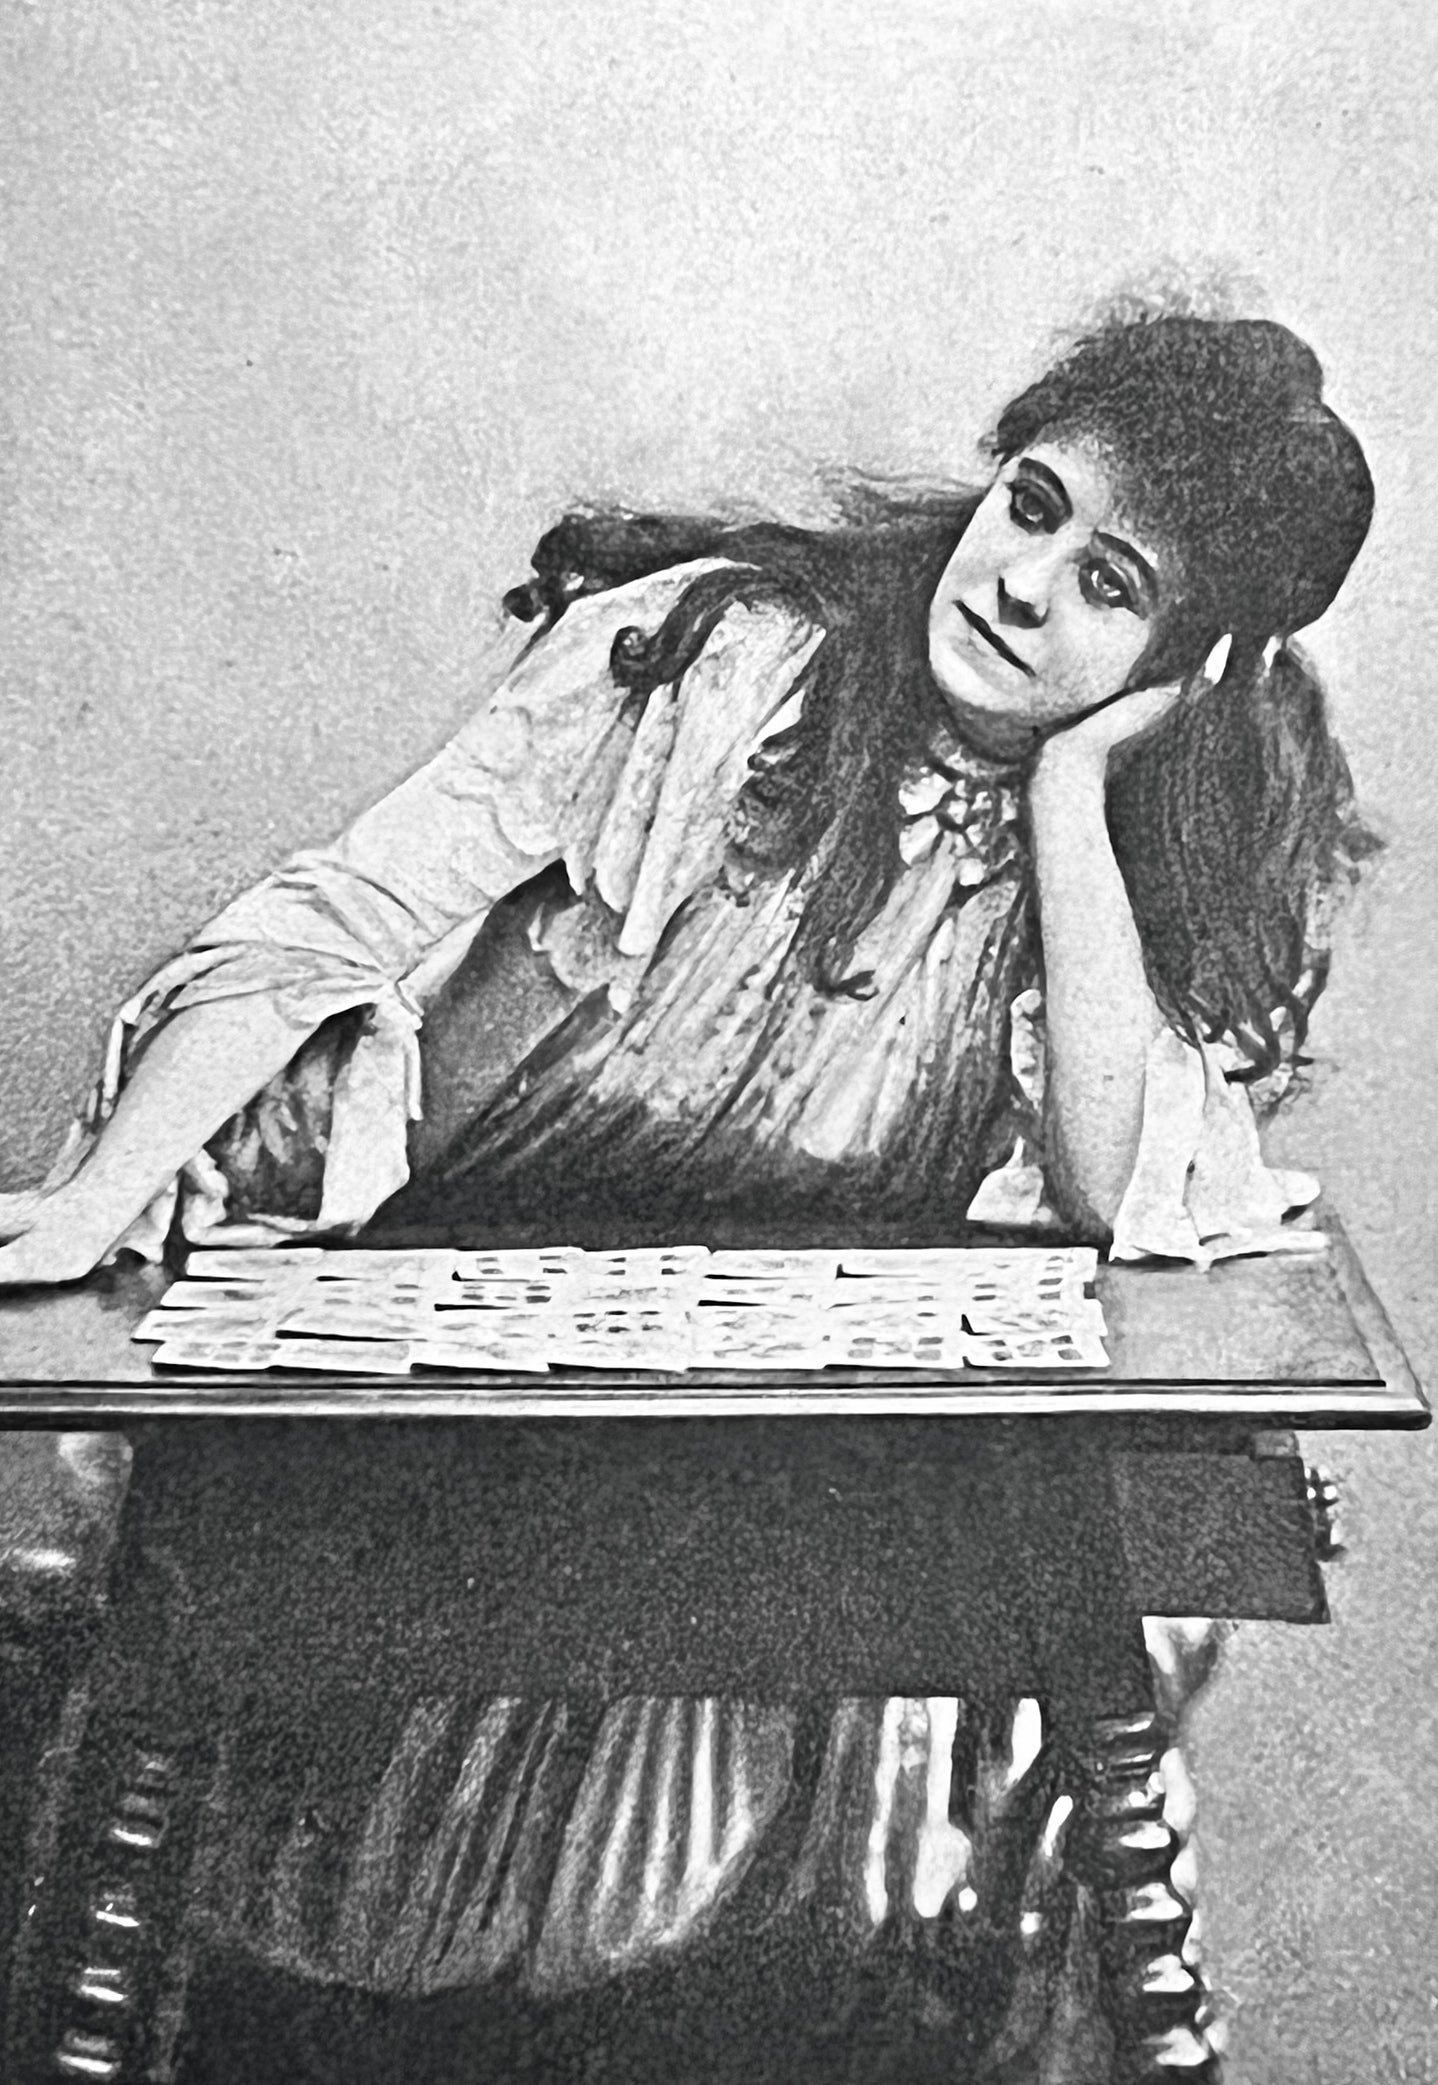 A 19th-century fortune teller with her deck of tarot cards